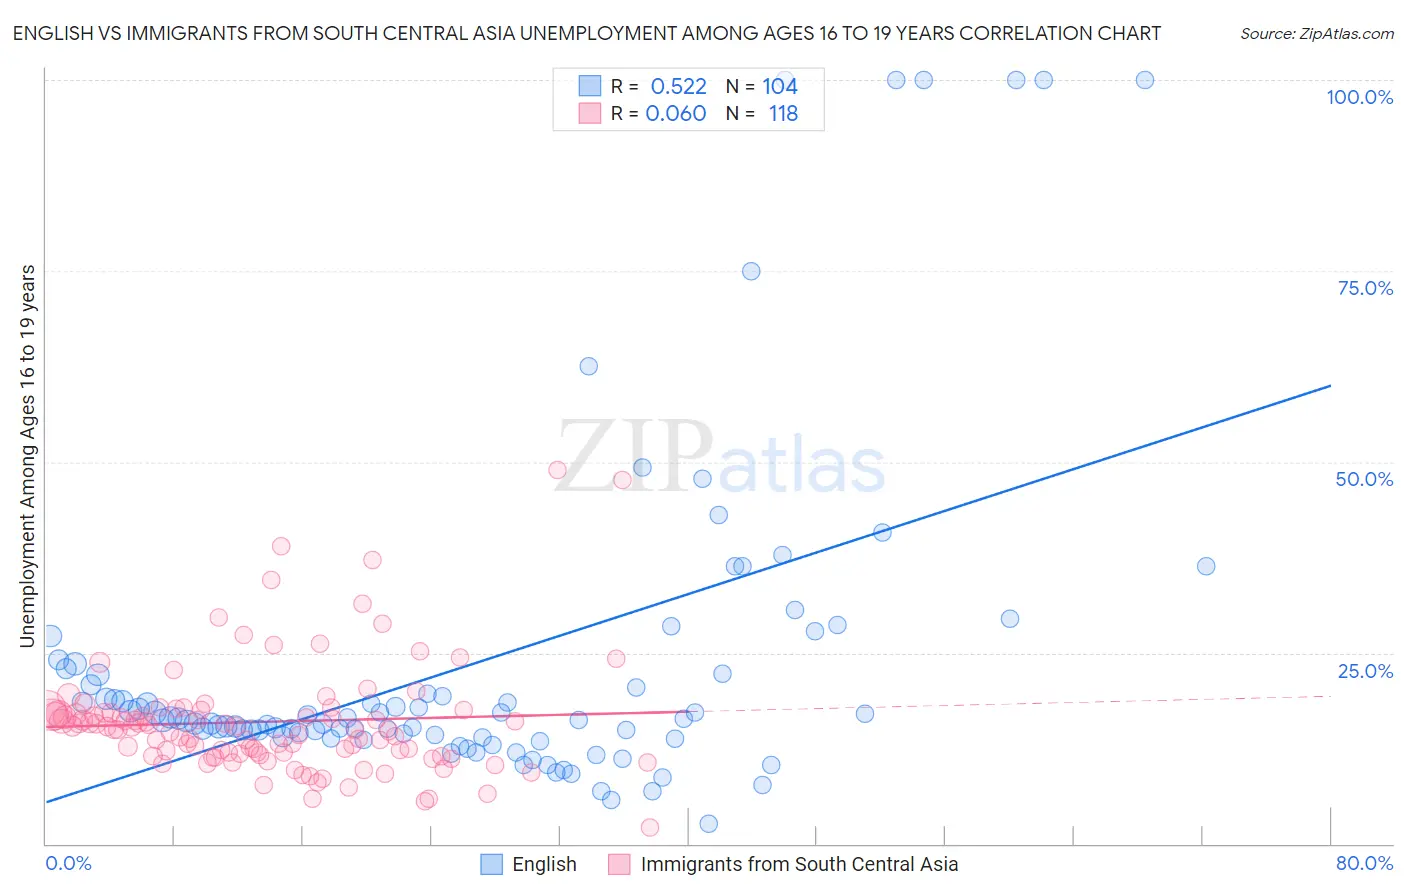 English vs Immigrants from South Central Asia Unemployment Among Ages 16 to 19 years